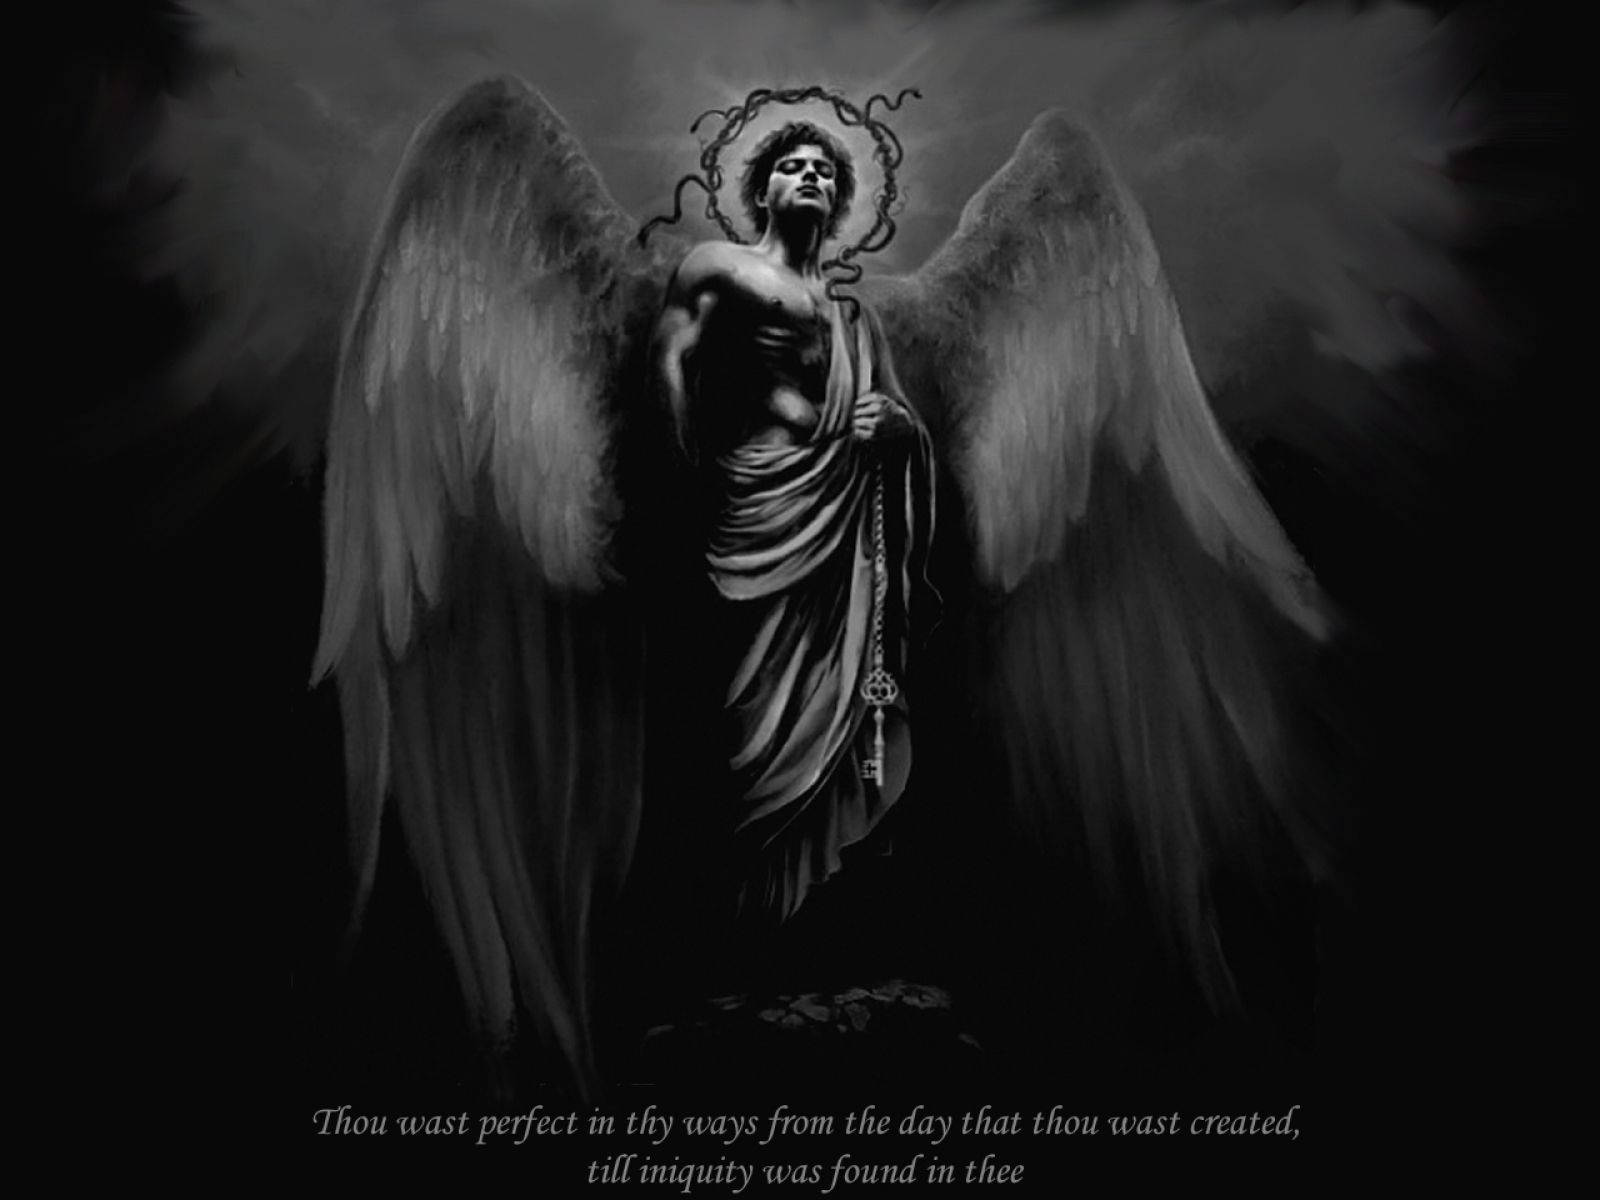 Free Lucifer Wallpaper Downloads, [100+] Lucifer Wallpapers for FREE |  